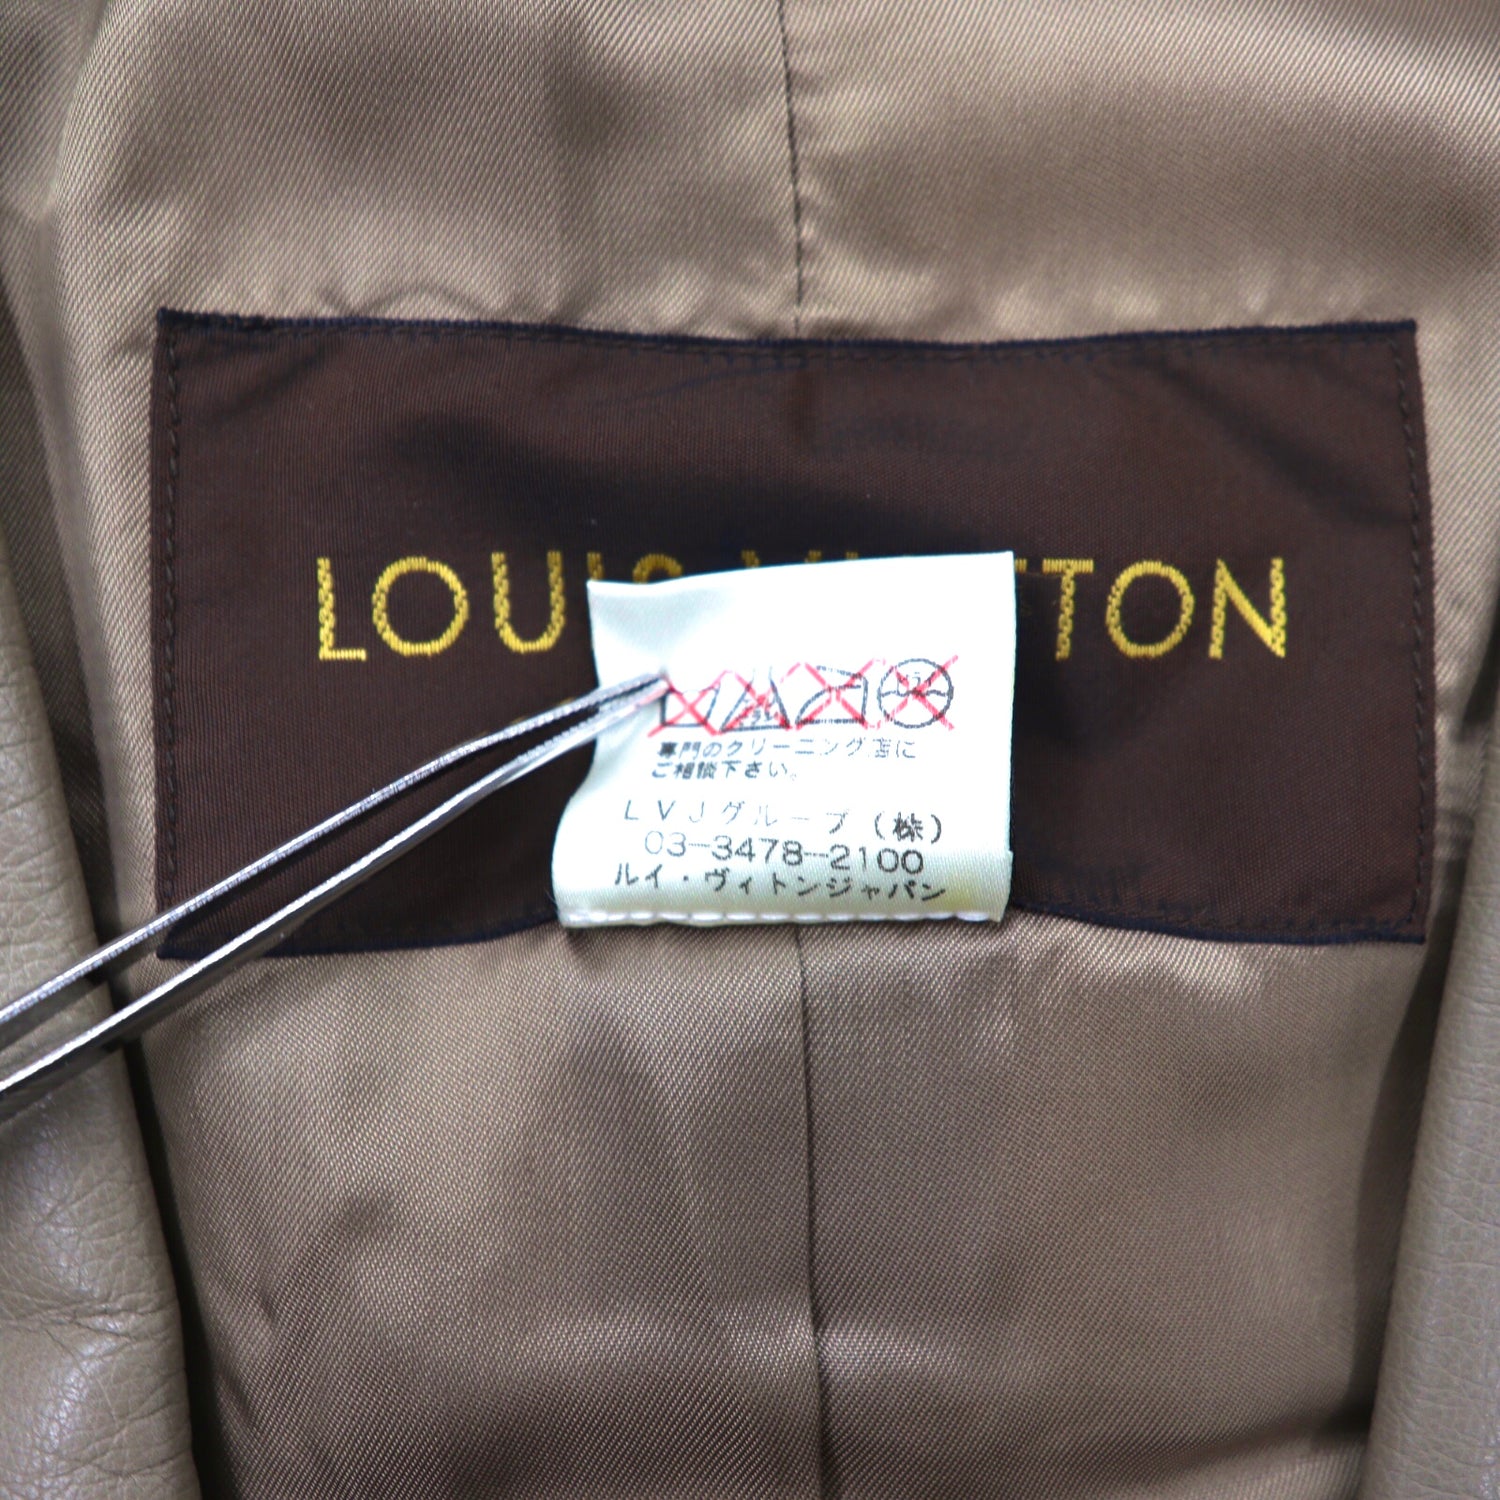 Louis Vuitton 2b Leather Tailored Jacket 48 Gray Made in France ...